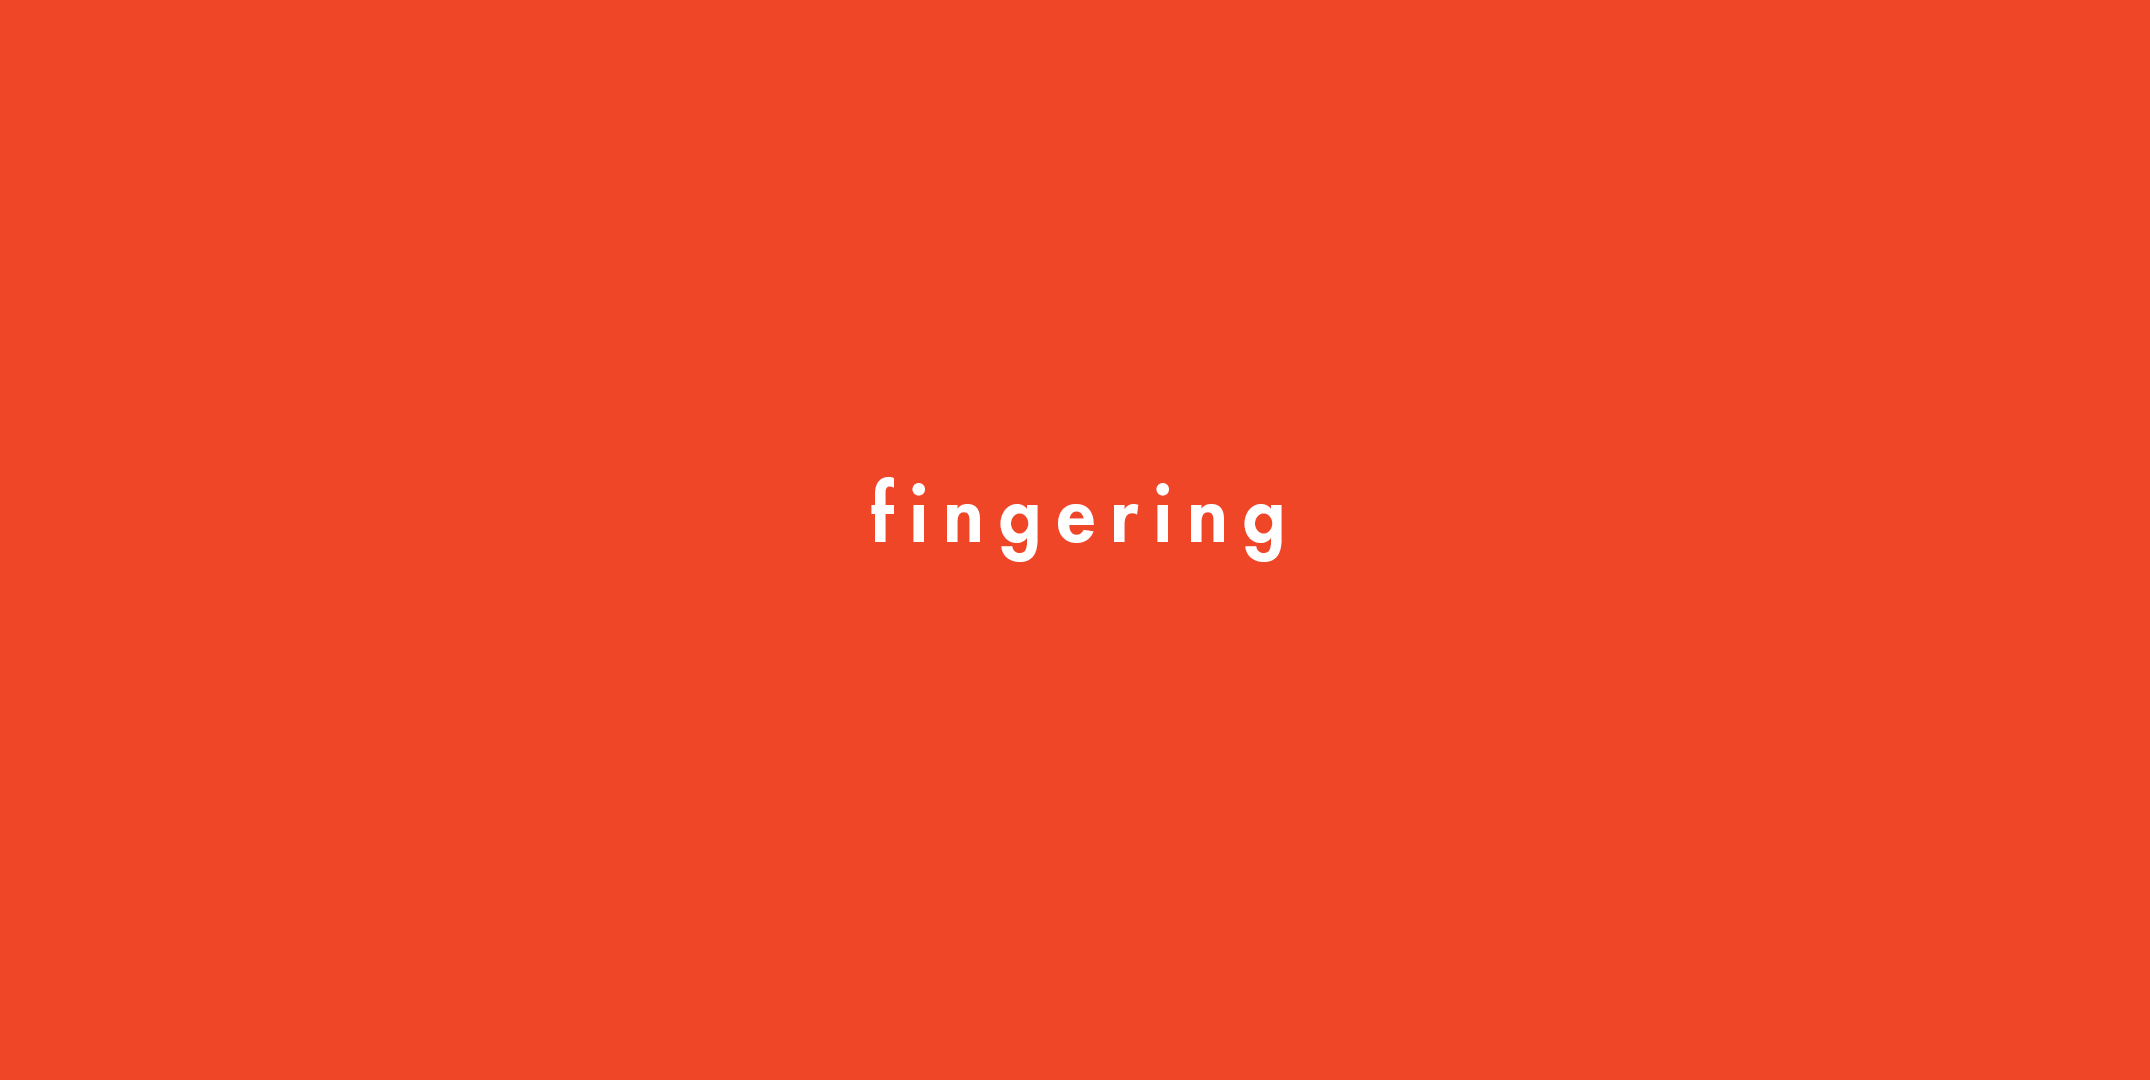 What Does Fingering Mean picture picture image